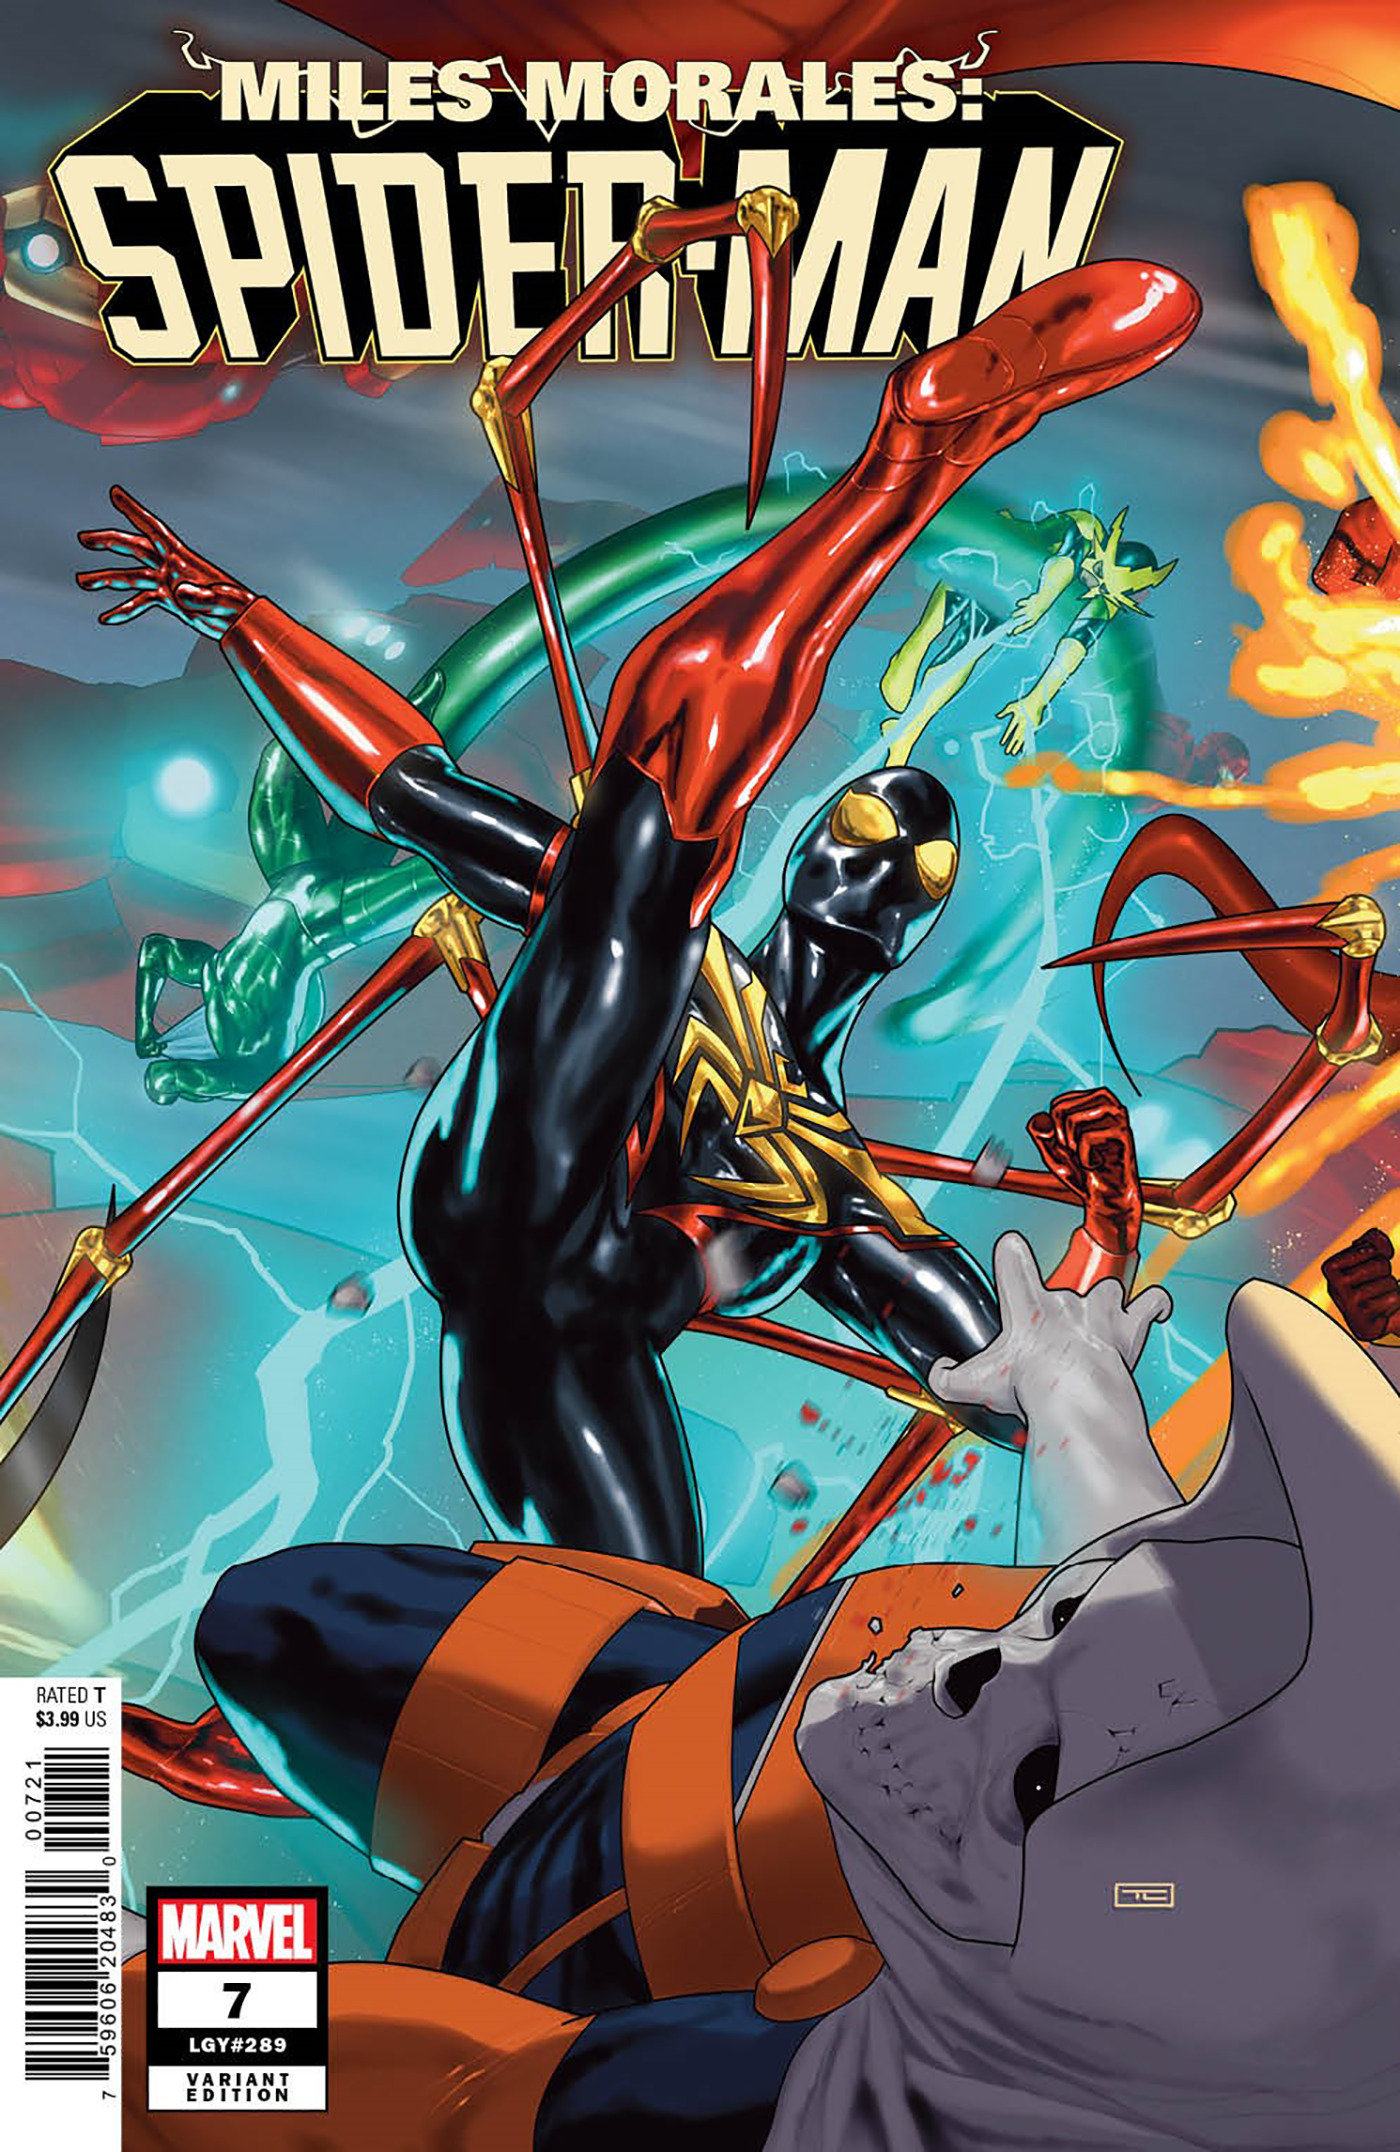 Miles Morales: Spider-Man #7 Taurin Clarke Connecting Variant